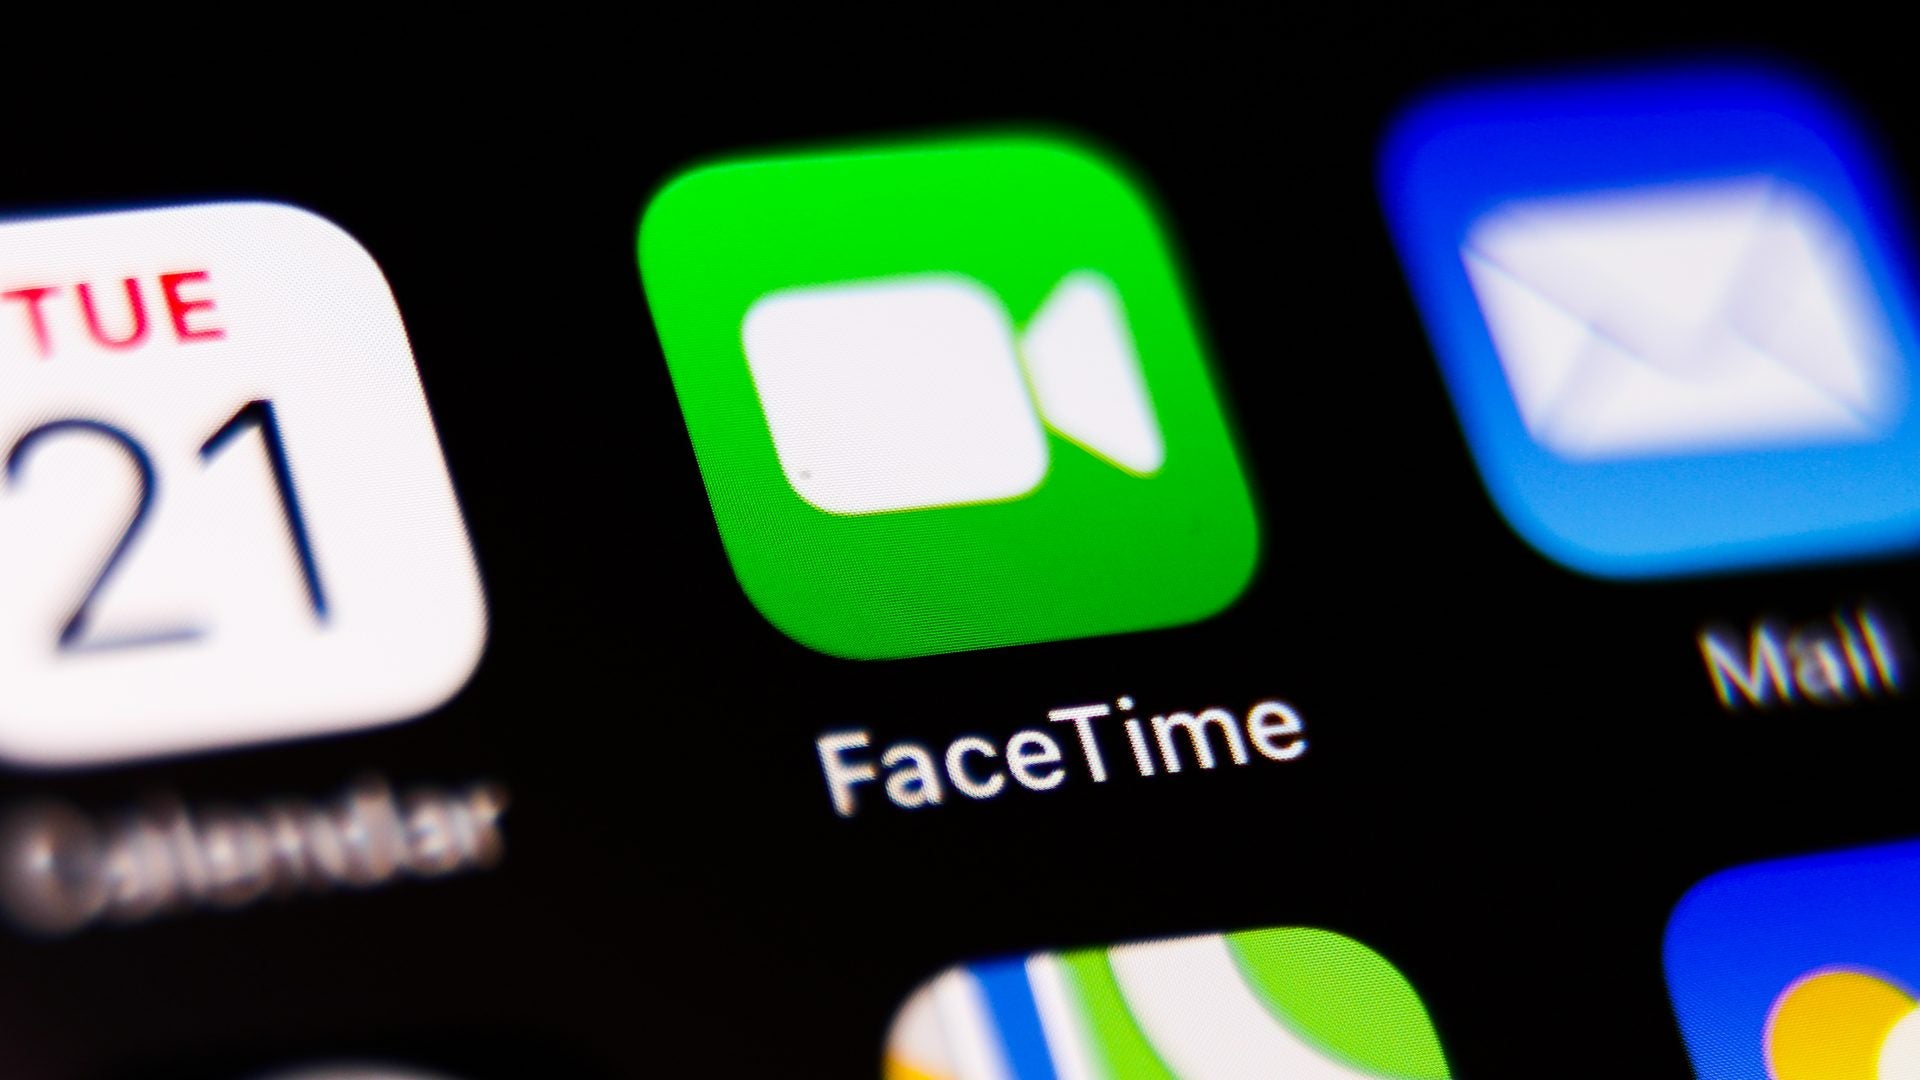 You Can Now FaceTime With Non-iPhone Users